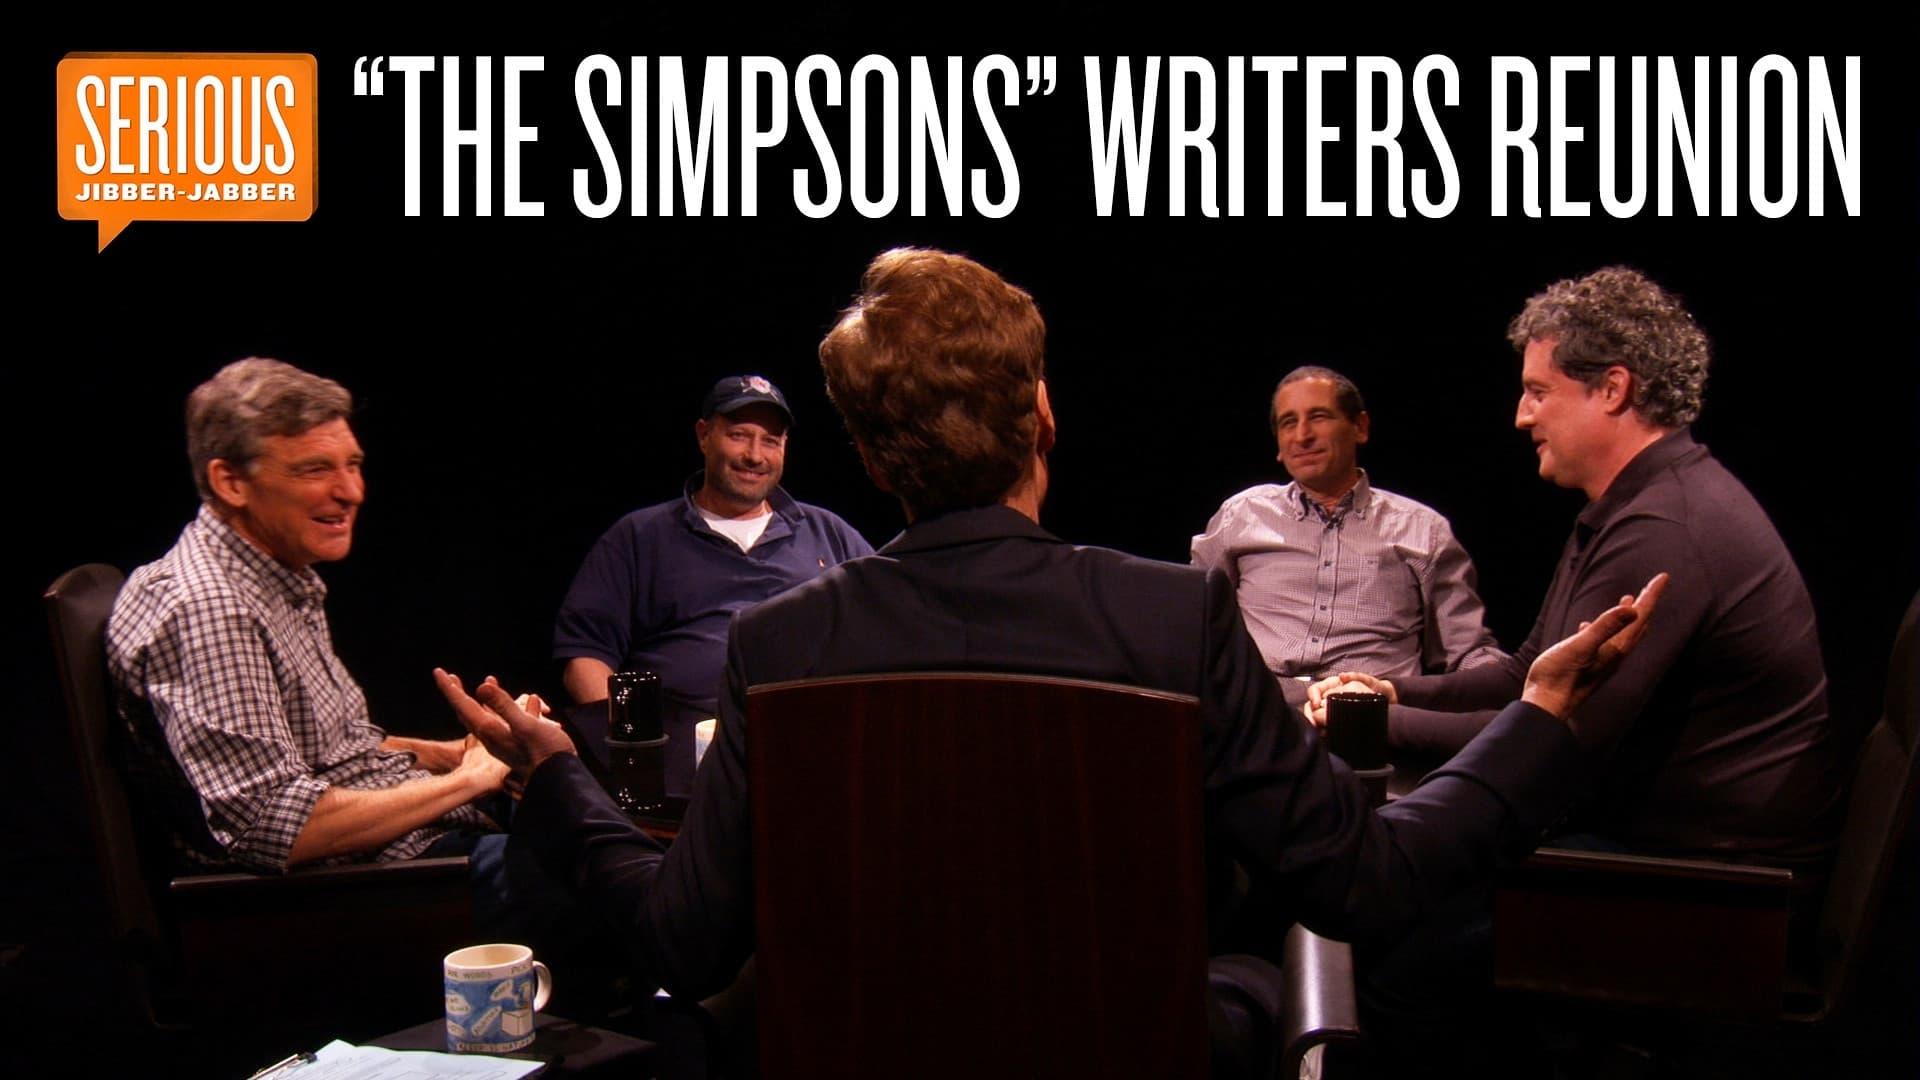 "The Simpsons" Writers Reunion -- Serious Jibber-Jabber with Conan O'Brien backdrop